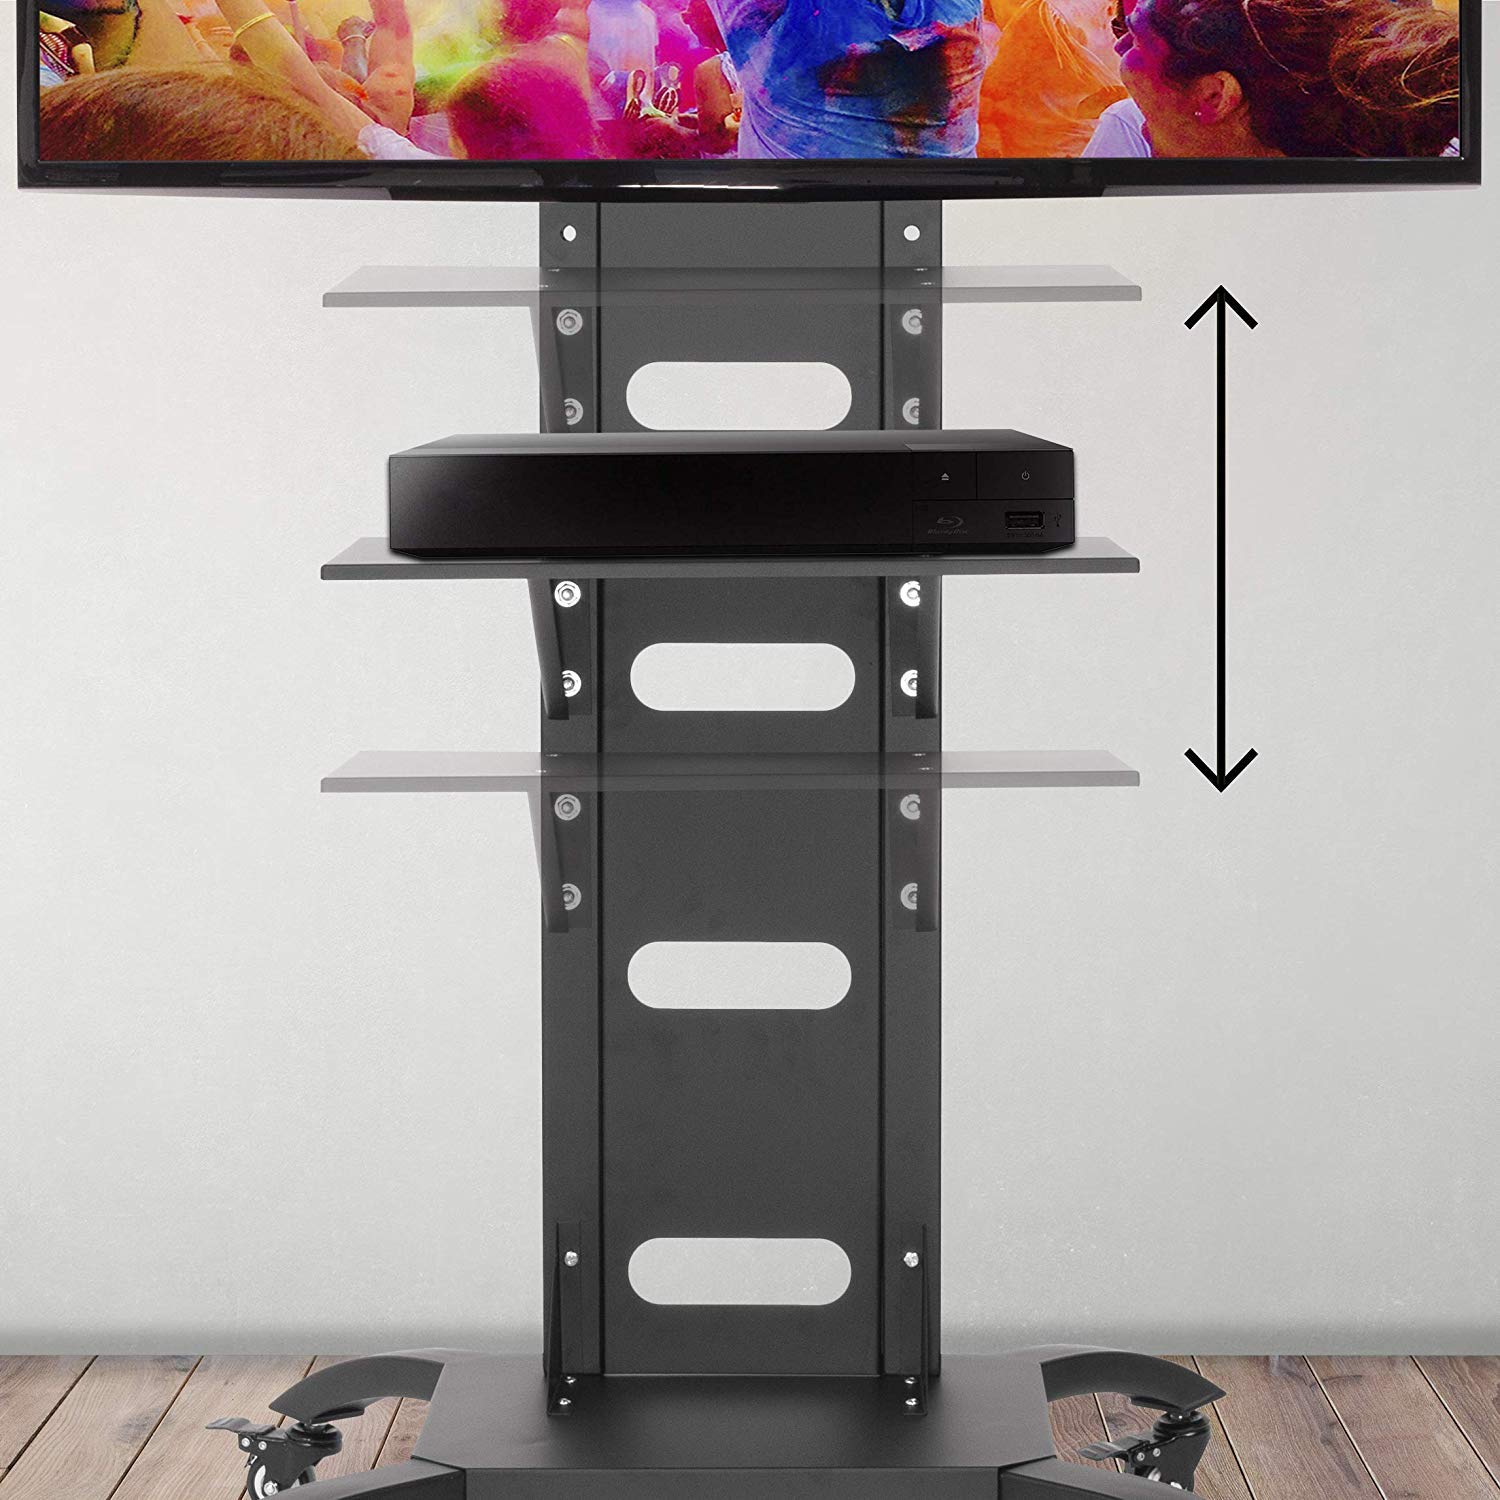 Duronic TV Mount Stand Bracket TVS4T1 | Floor Standing for 37-70 Inch Flat Screen | With Tilt and Swivel | VESA Up to 700x400 | Strong Heavy Duty | Max. 82kg Capacity | Shelf | On Wheels